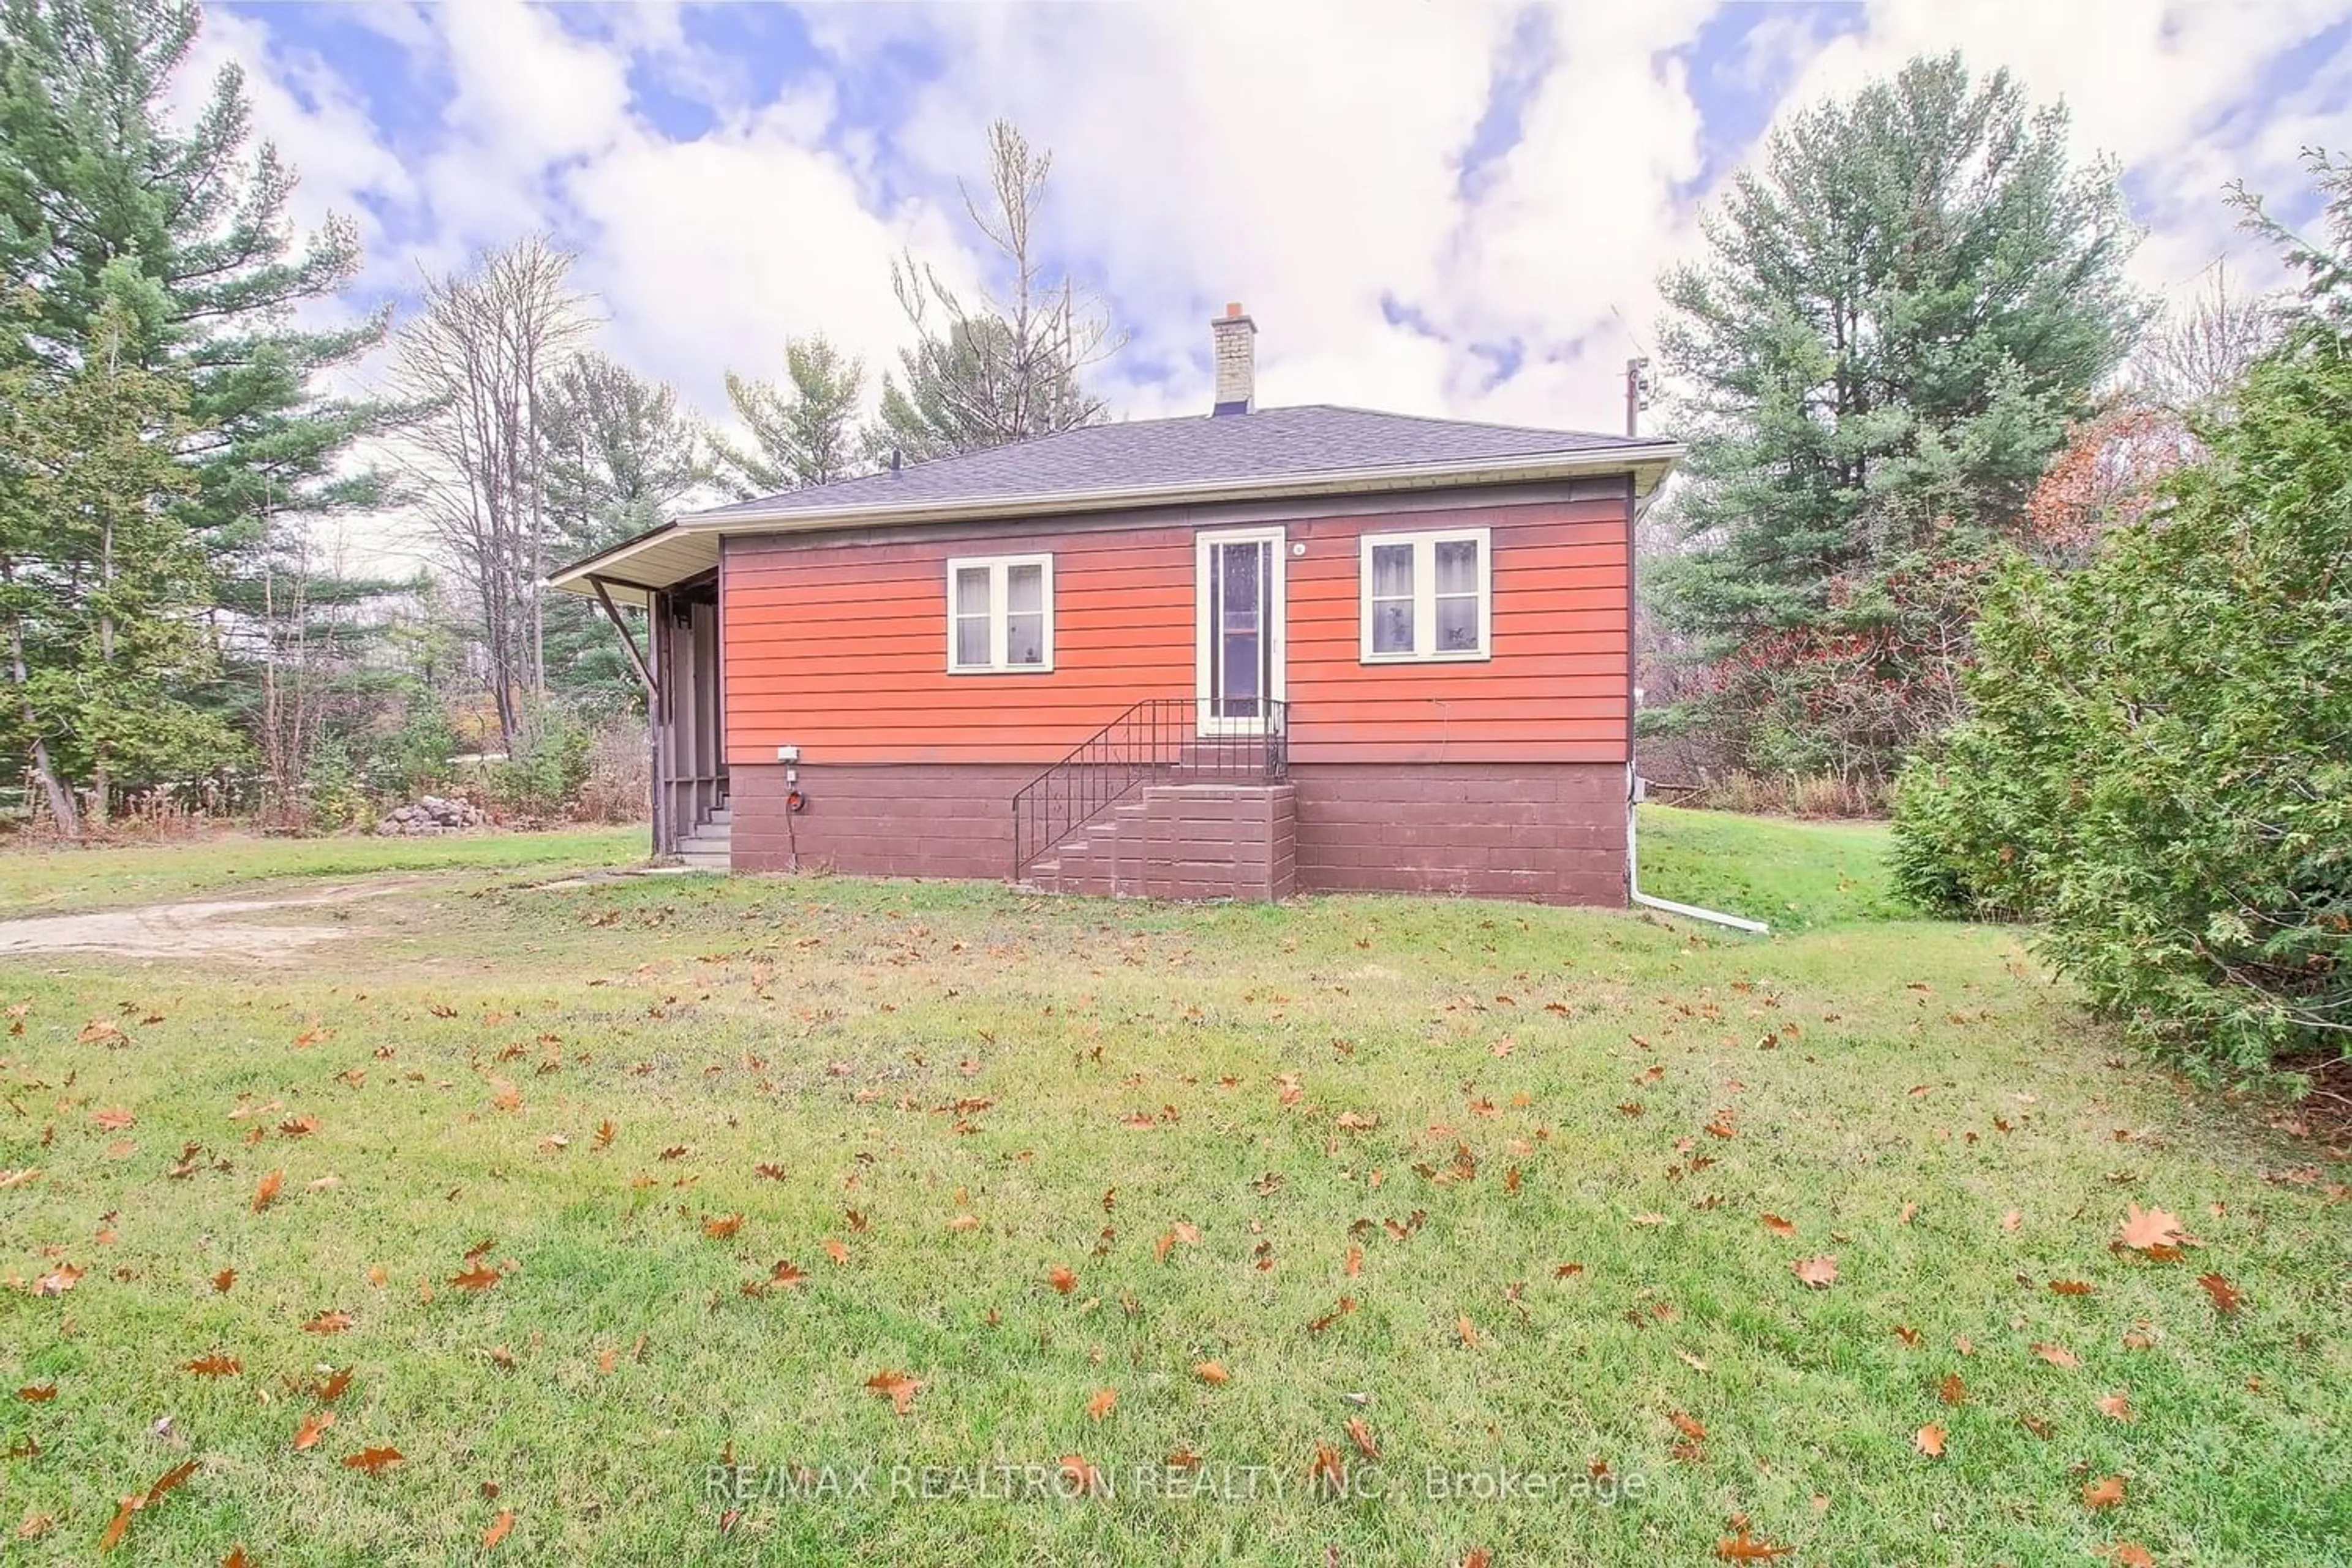 Cottage for 450 Queensville Sdrd, East Gwillimbury Ontario L9N 1A7